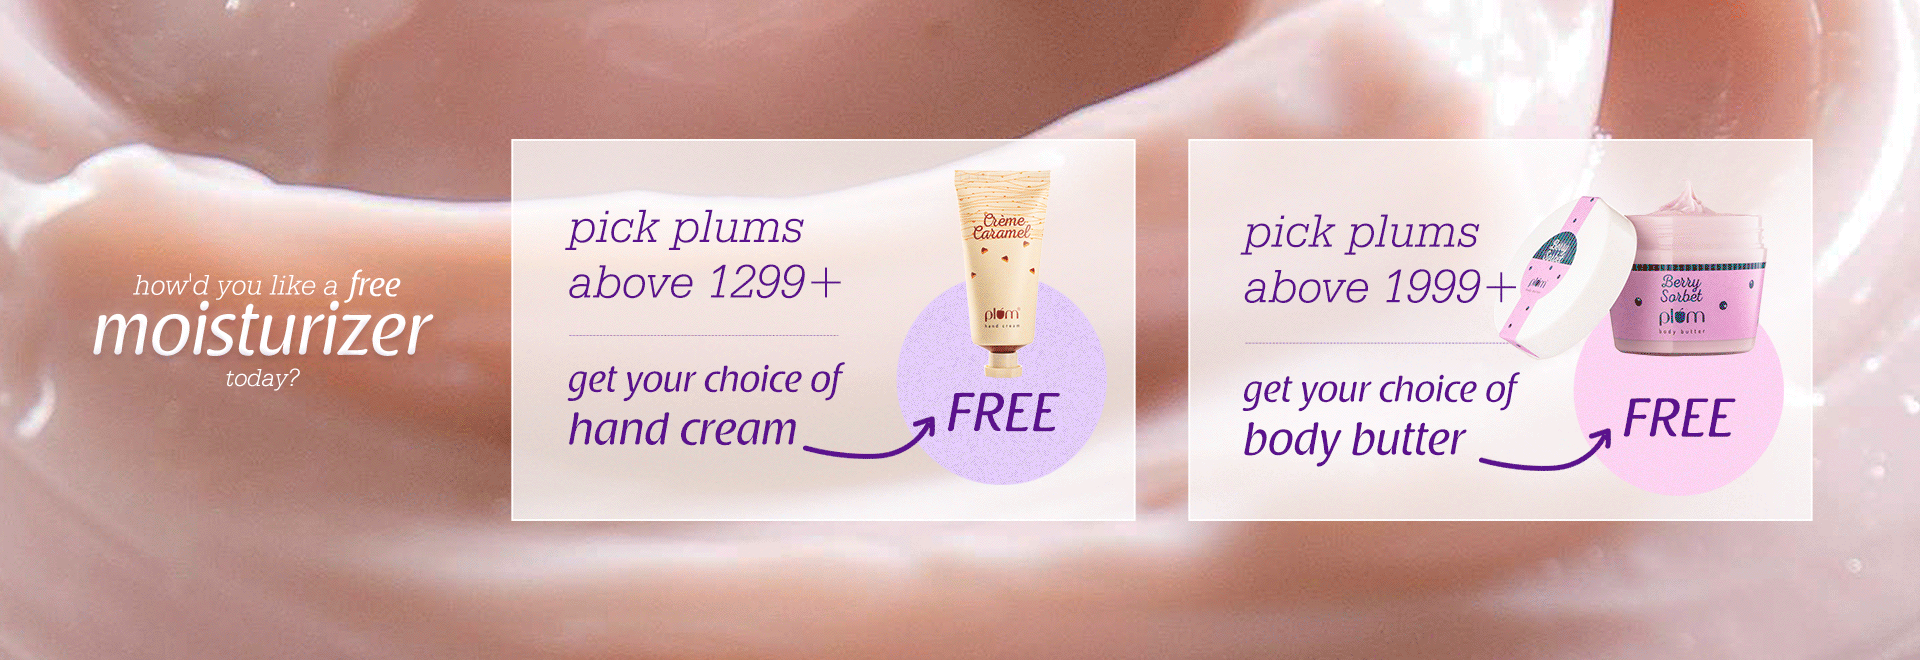 Get Hand Cream Free Of Choice With Orders Worth Rs. 1299 At Plumgoodness.Com